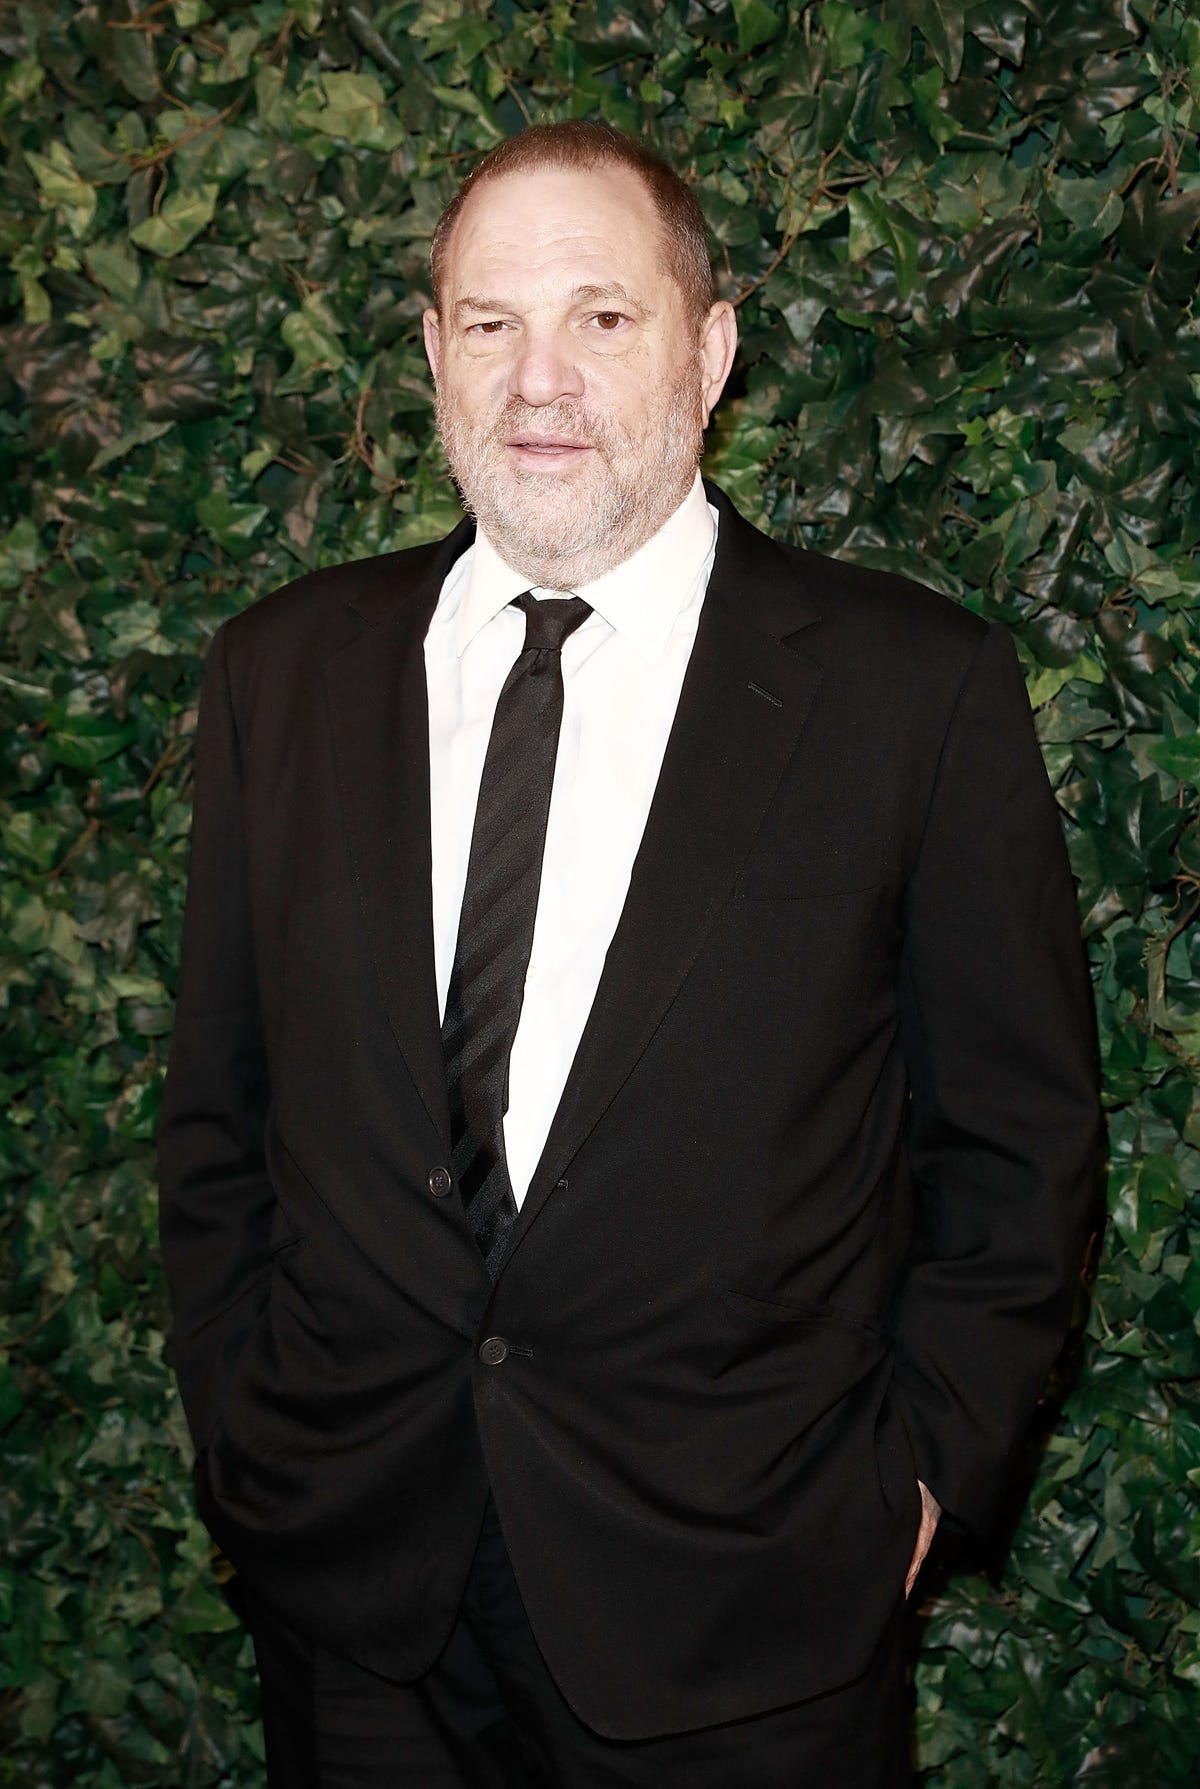 Harvey Weinstein To Turn Himself In To Face Sex Crime Charges In New York 4821